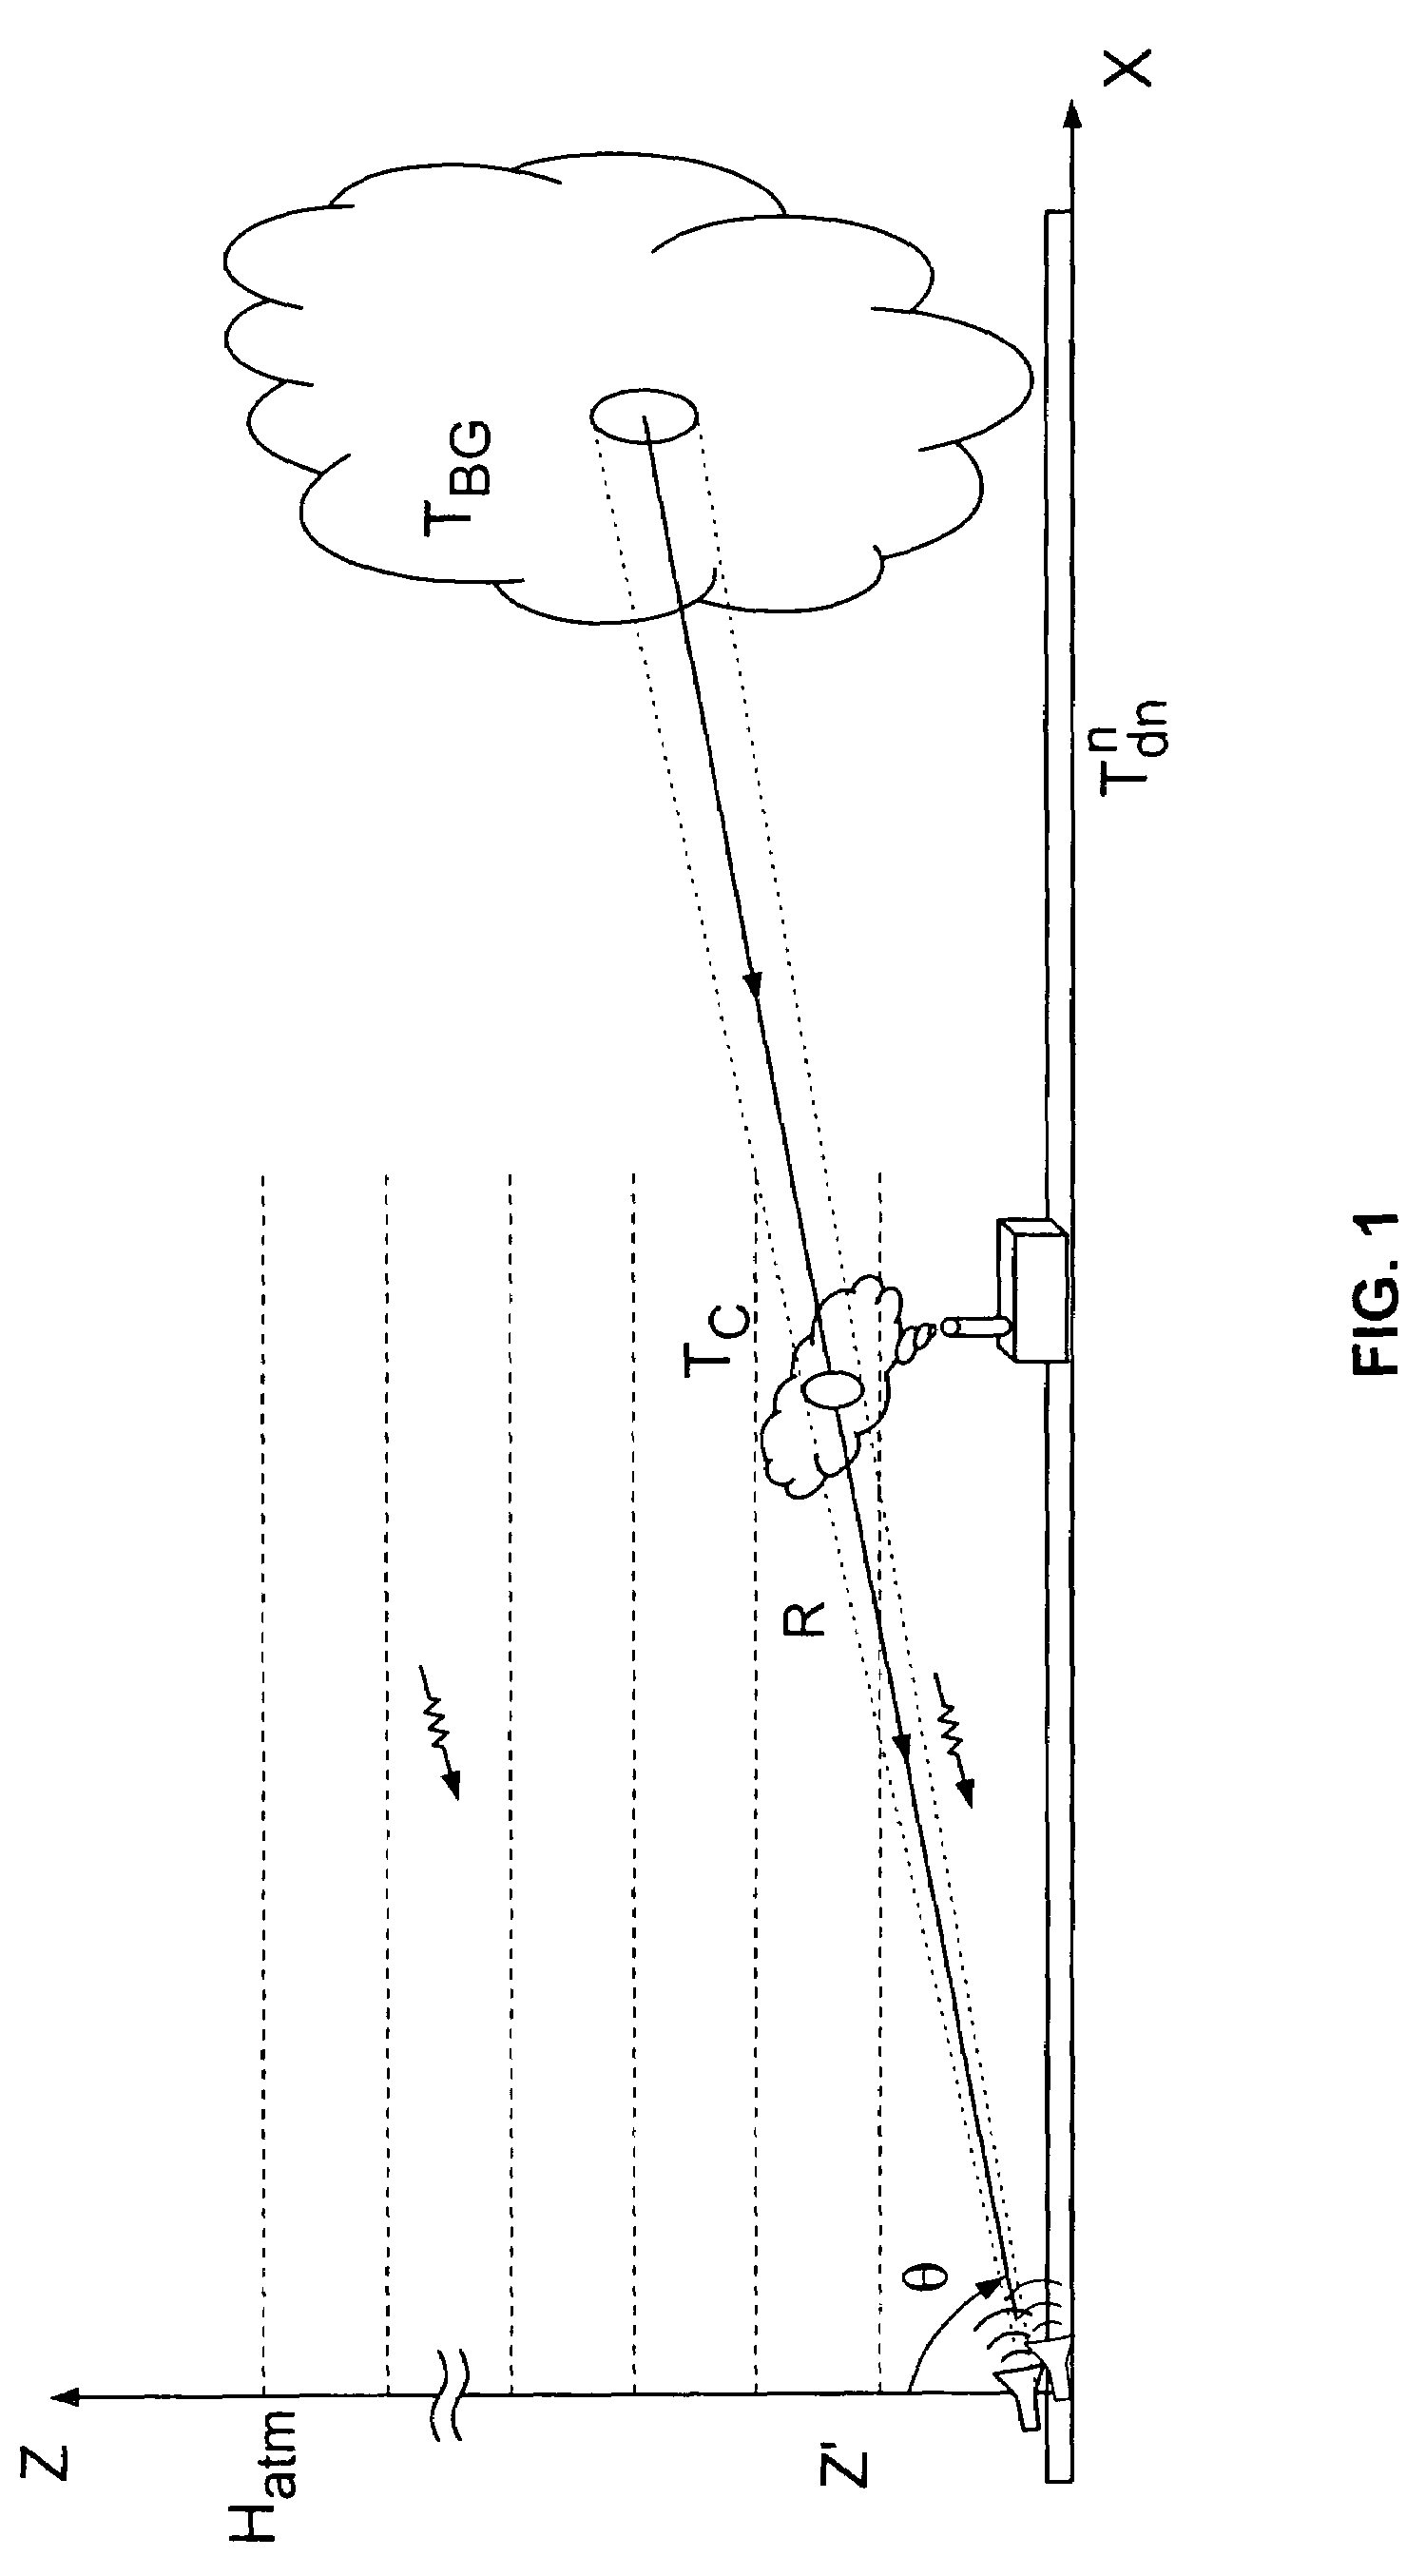 Passive millimeter wave spectrometer for remote detection of chemical plumes